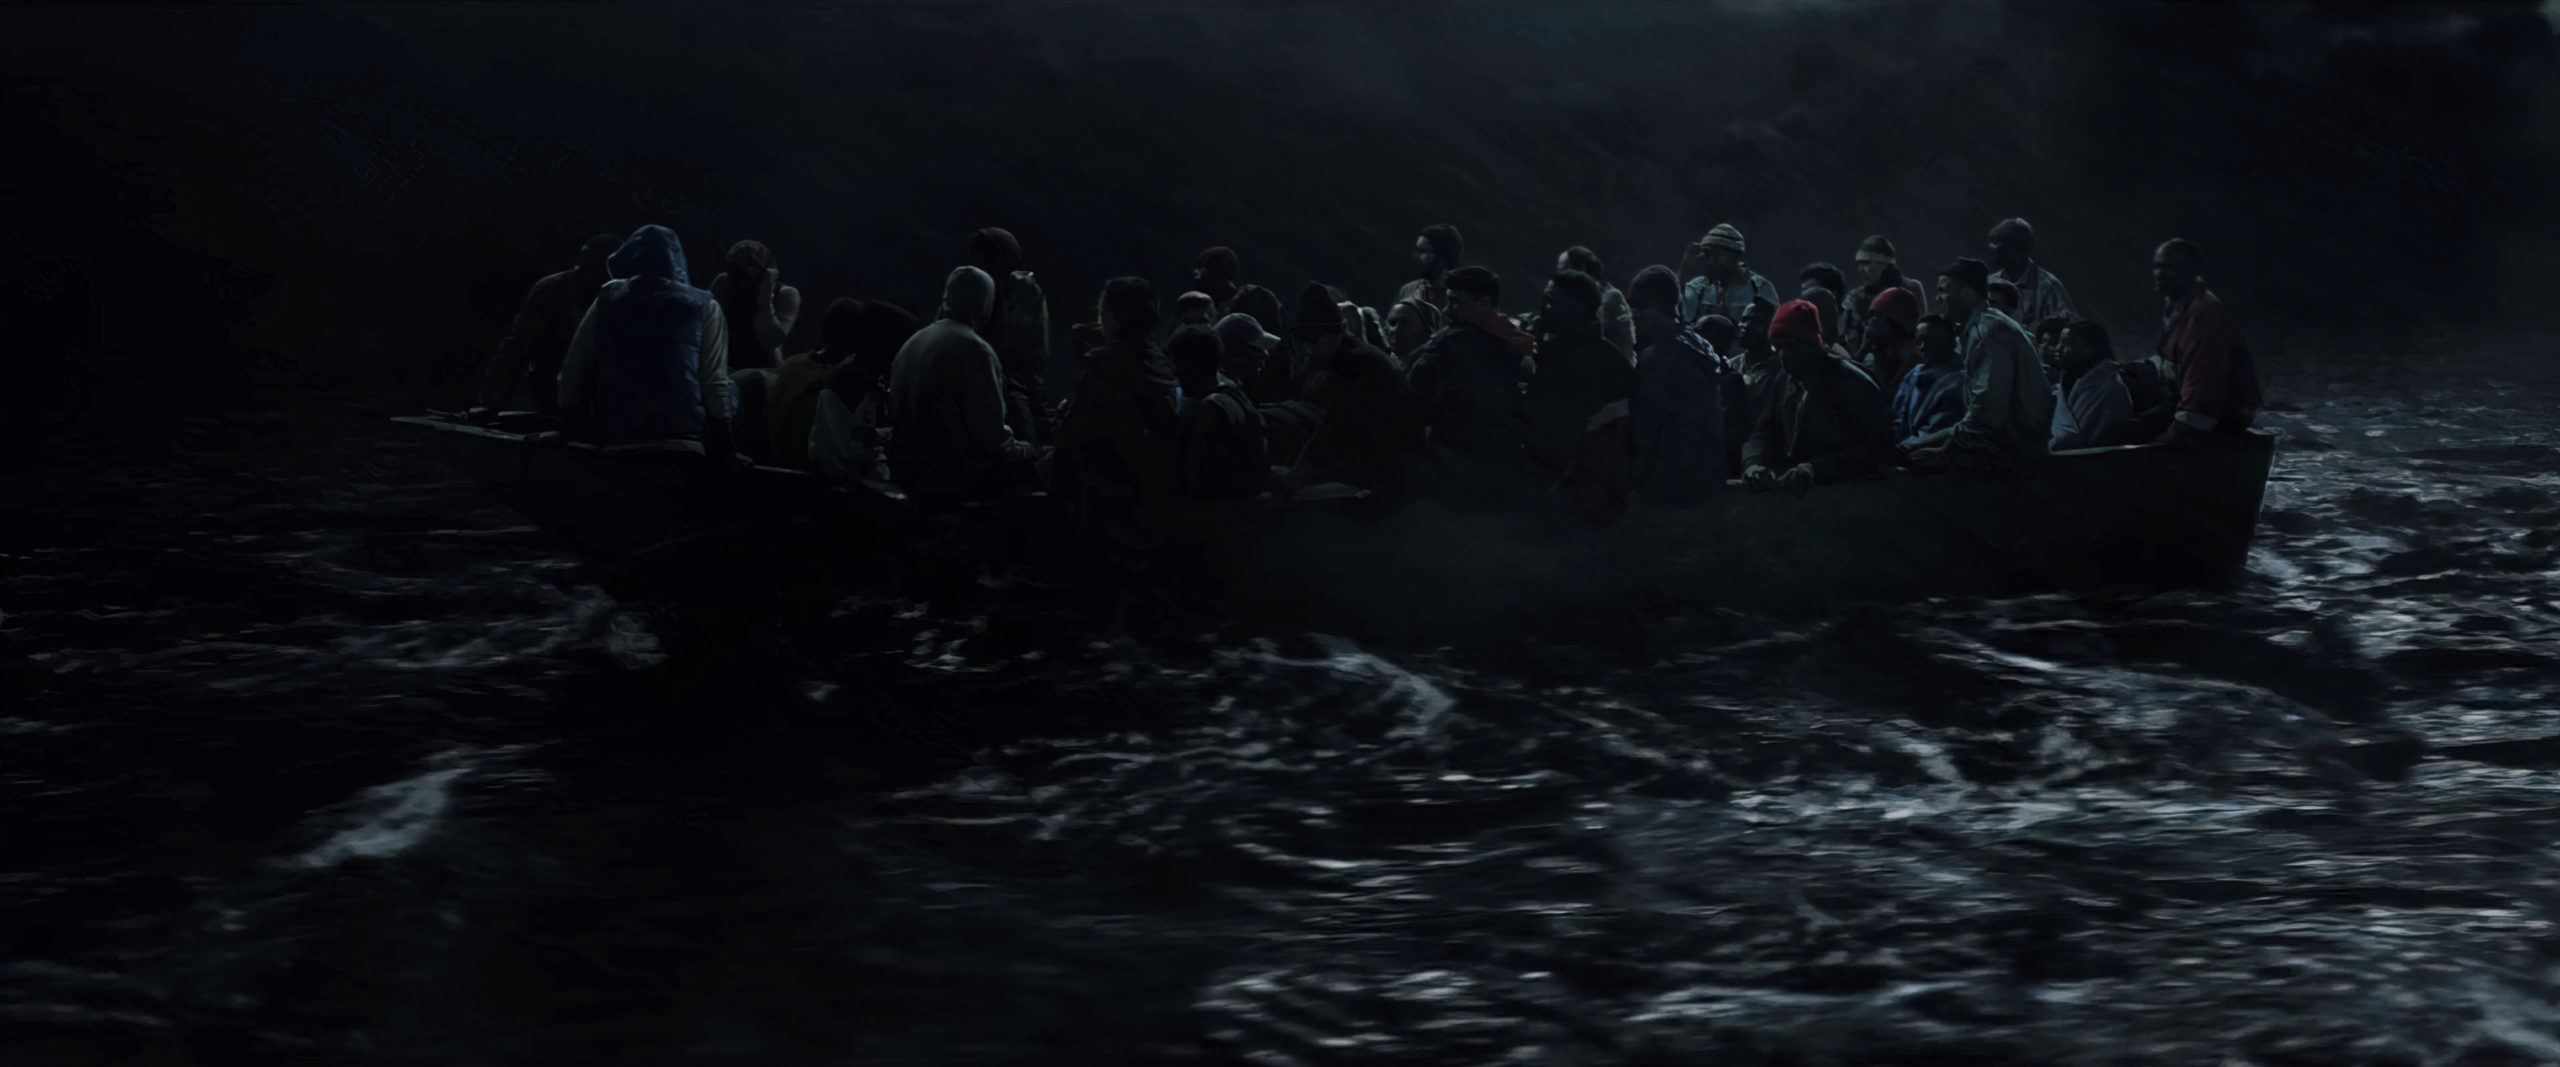 Digital Matte Painting for the film His House, showing a moody surreal scene of a man standing in a stormy ocean